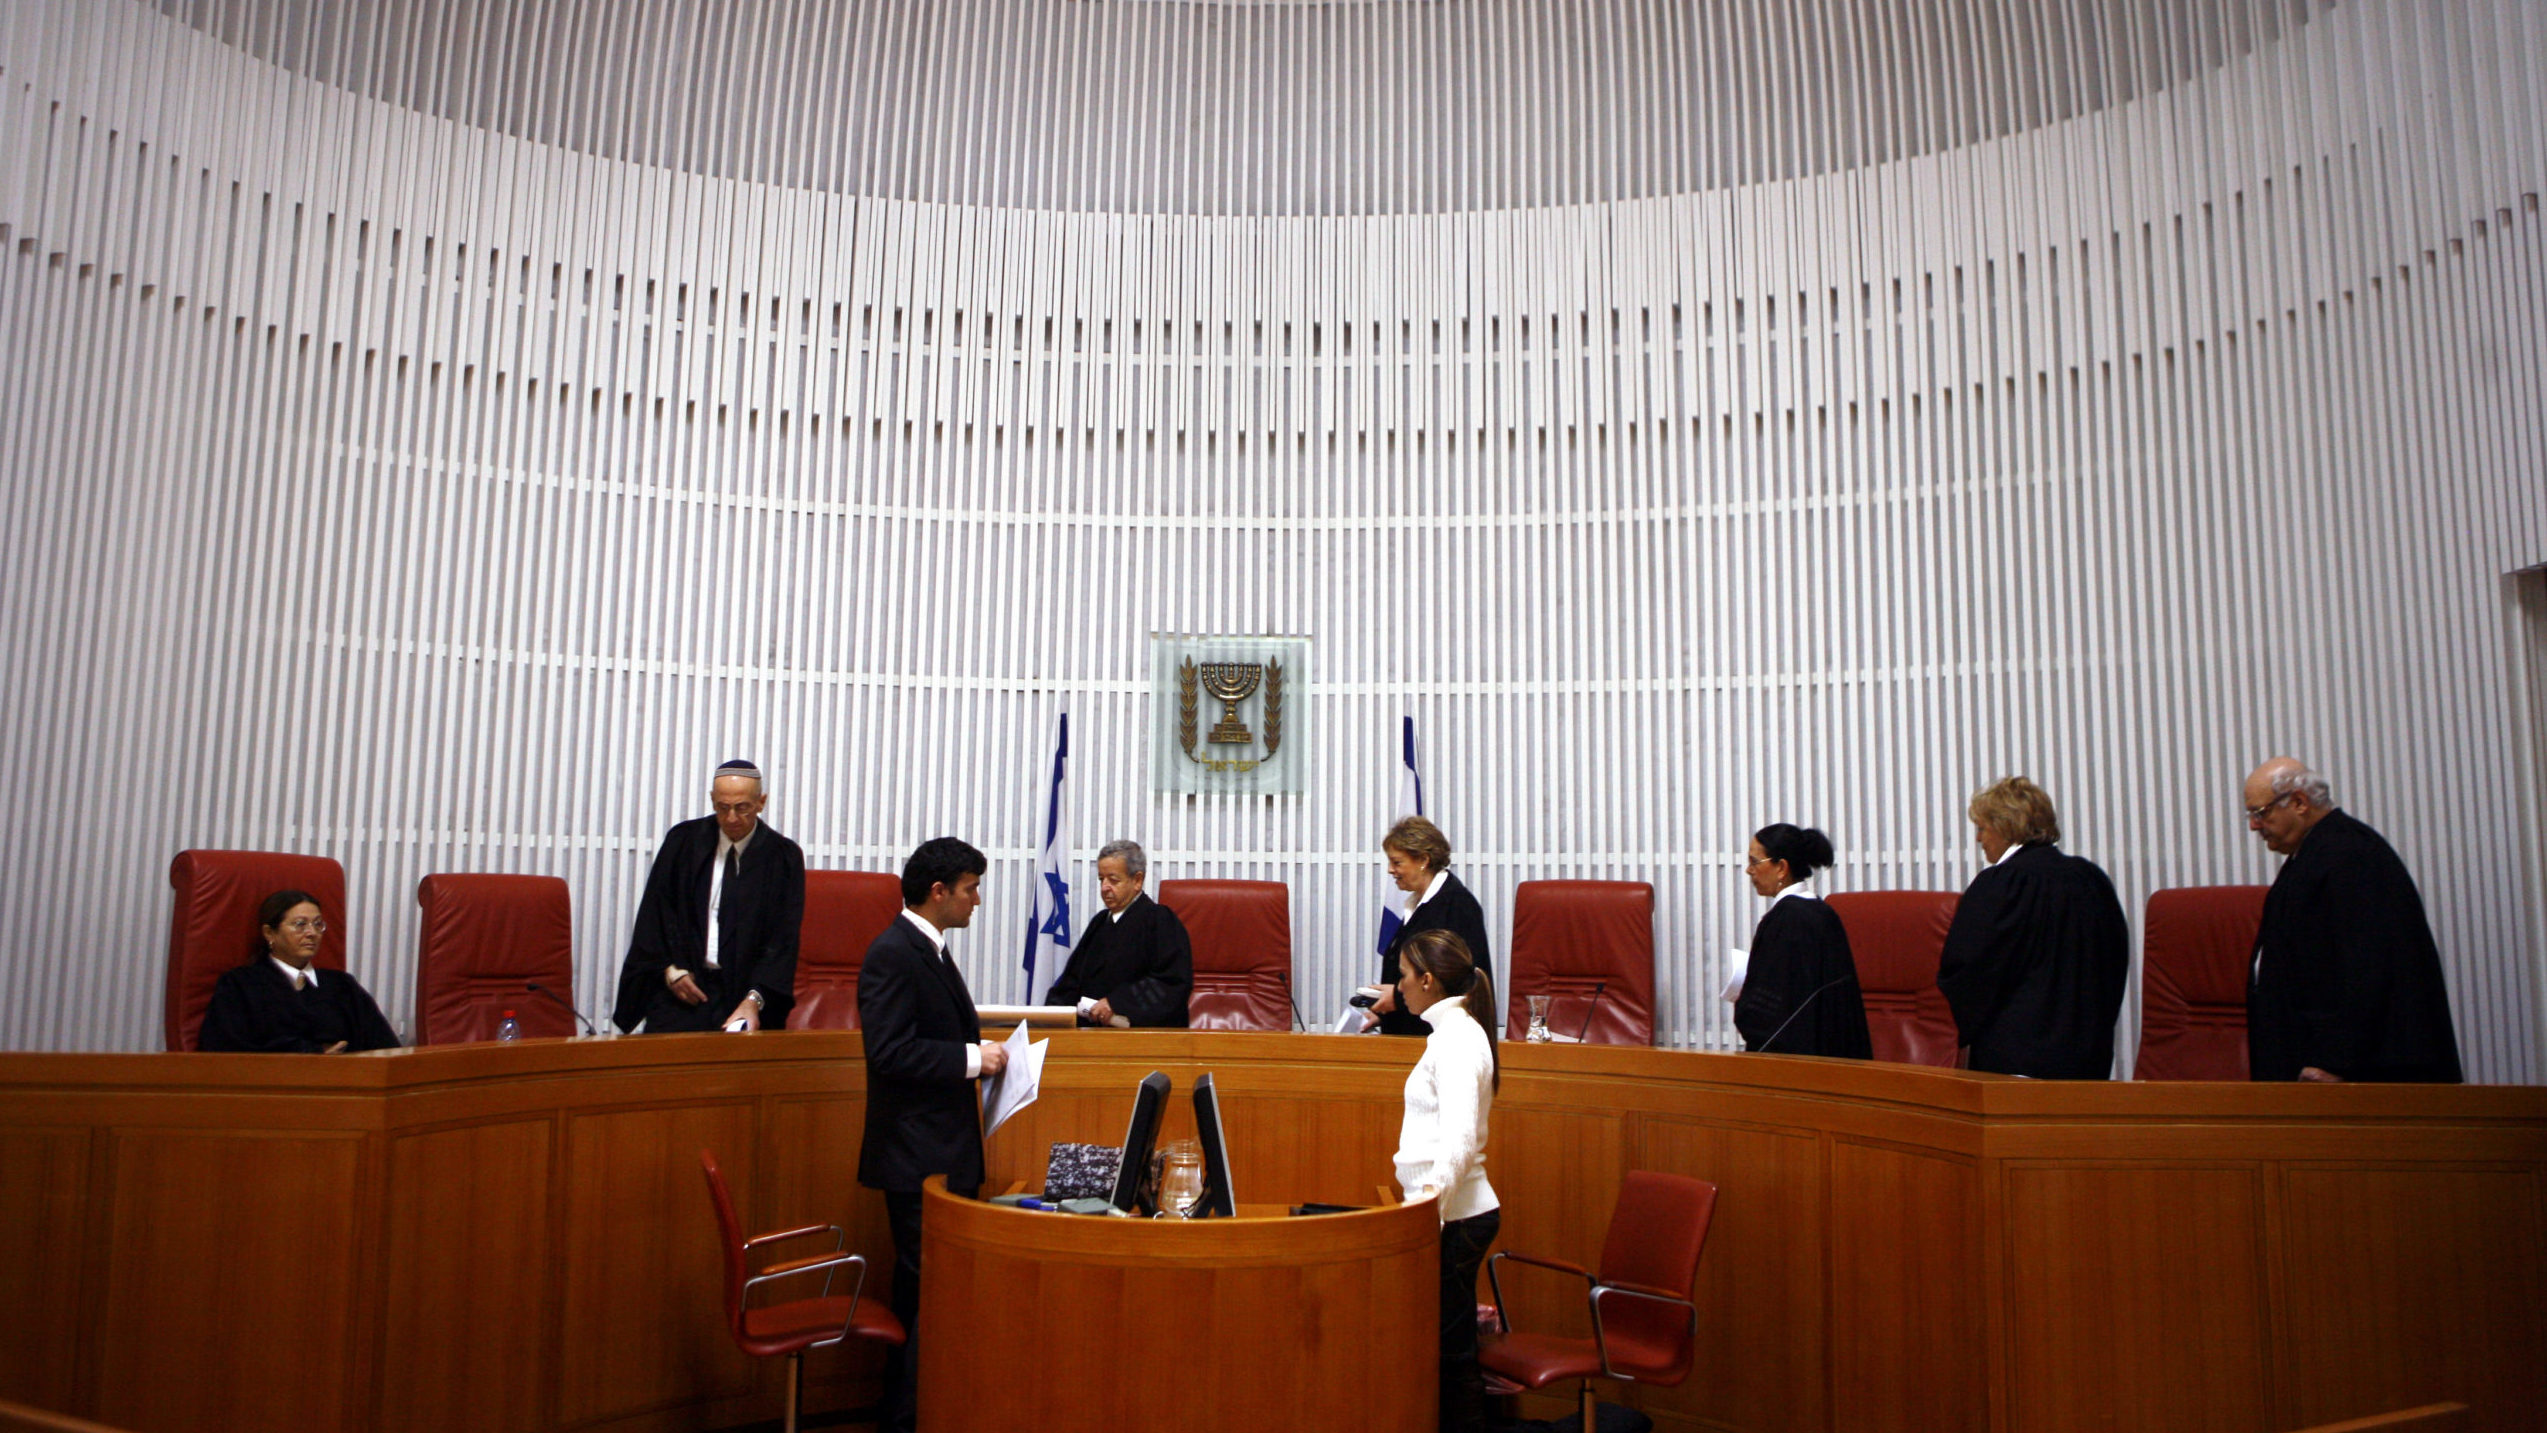 Reforms in Israeli Judicial System Subject to Heated Political Debate